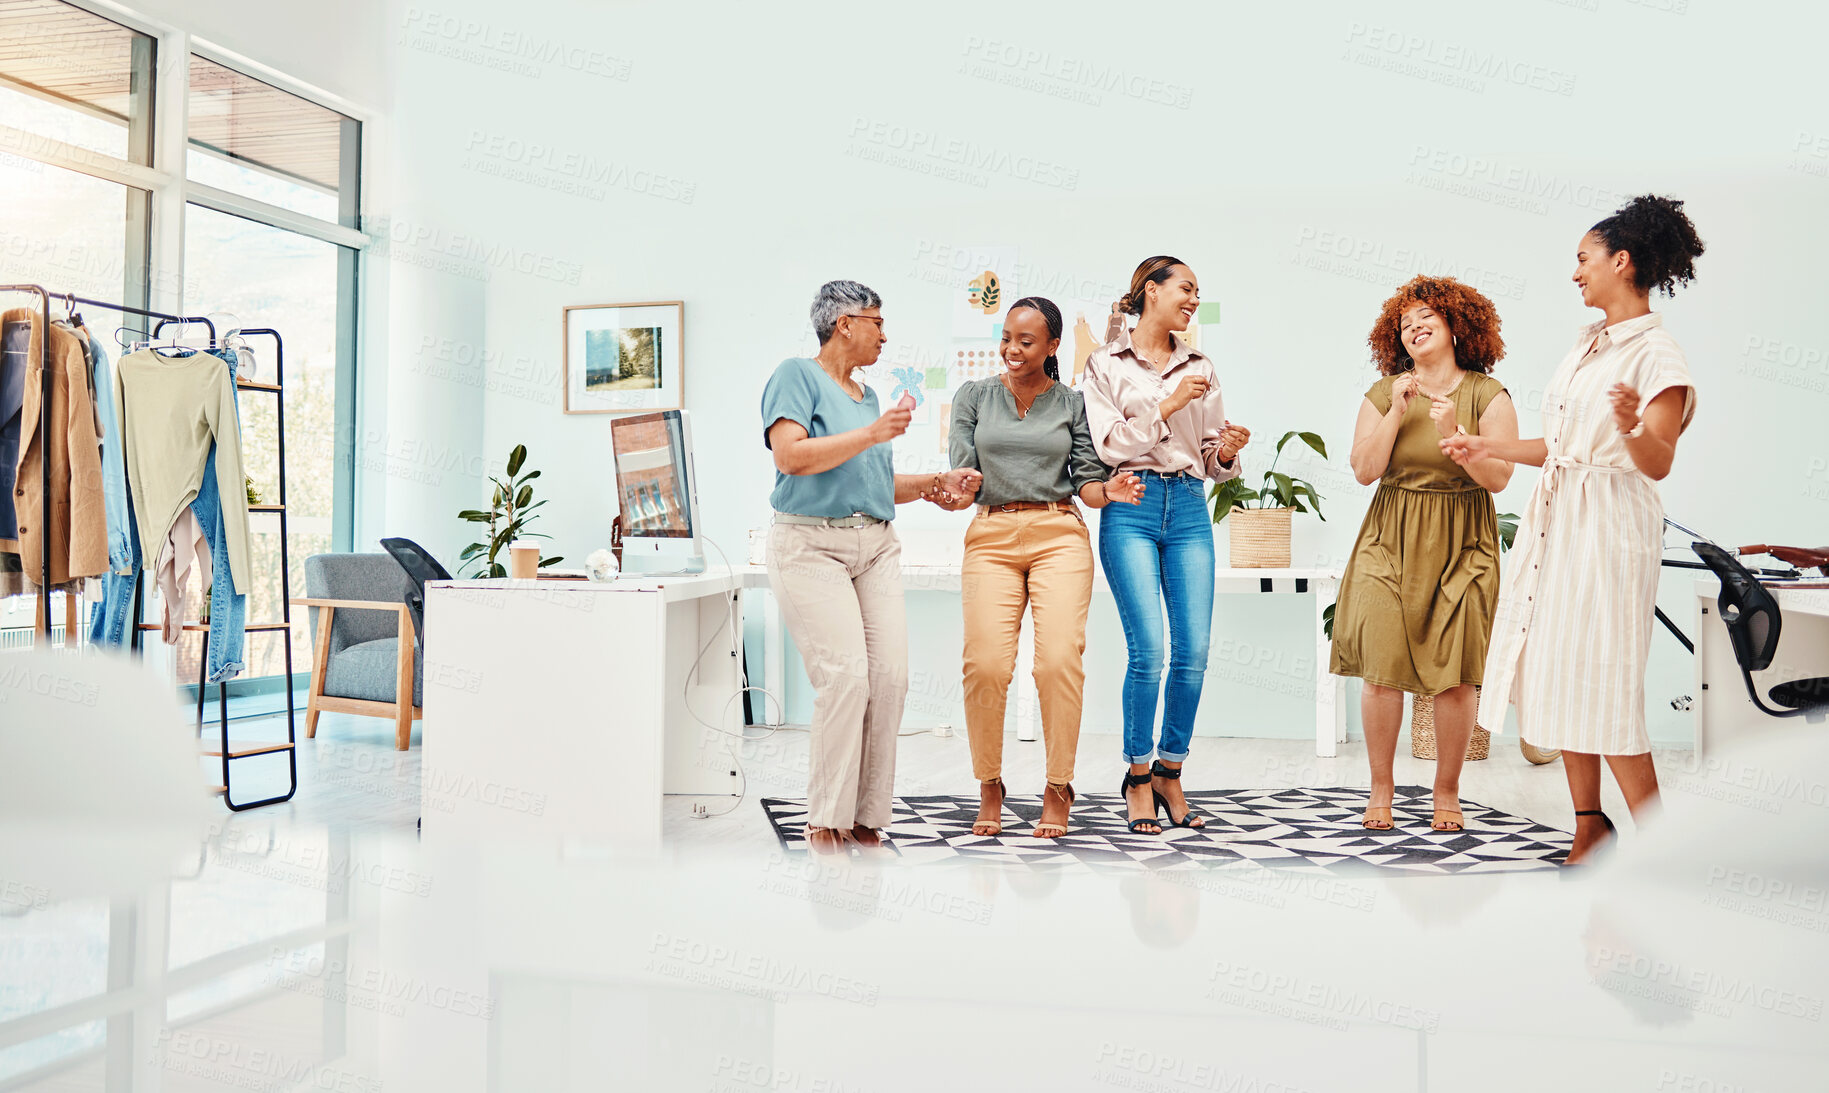 Buy stock photo Office, dancing or happy designers in celebration of fashion design victory or winning group achievement. Party, break or excited colleagues cheering for teamwork, goal target or bonus deal success